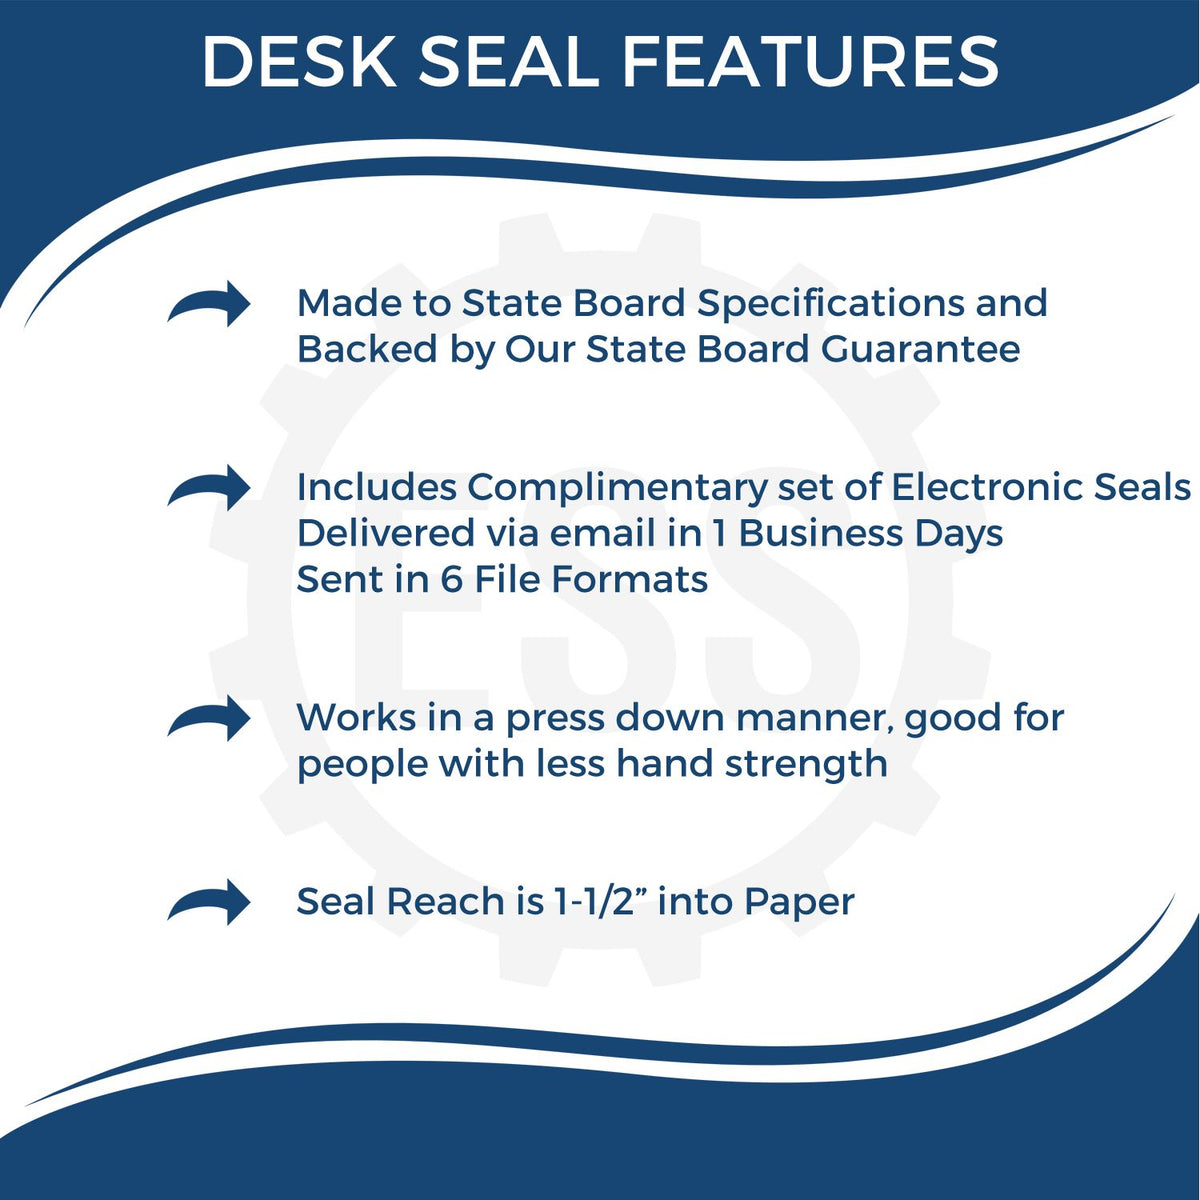 A picture of an infographic highlighting the selling points for the Tennessee Desk Architect Embossing Seal